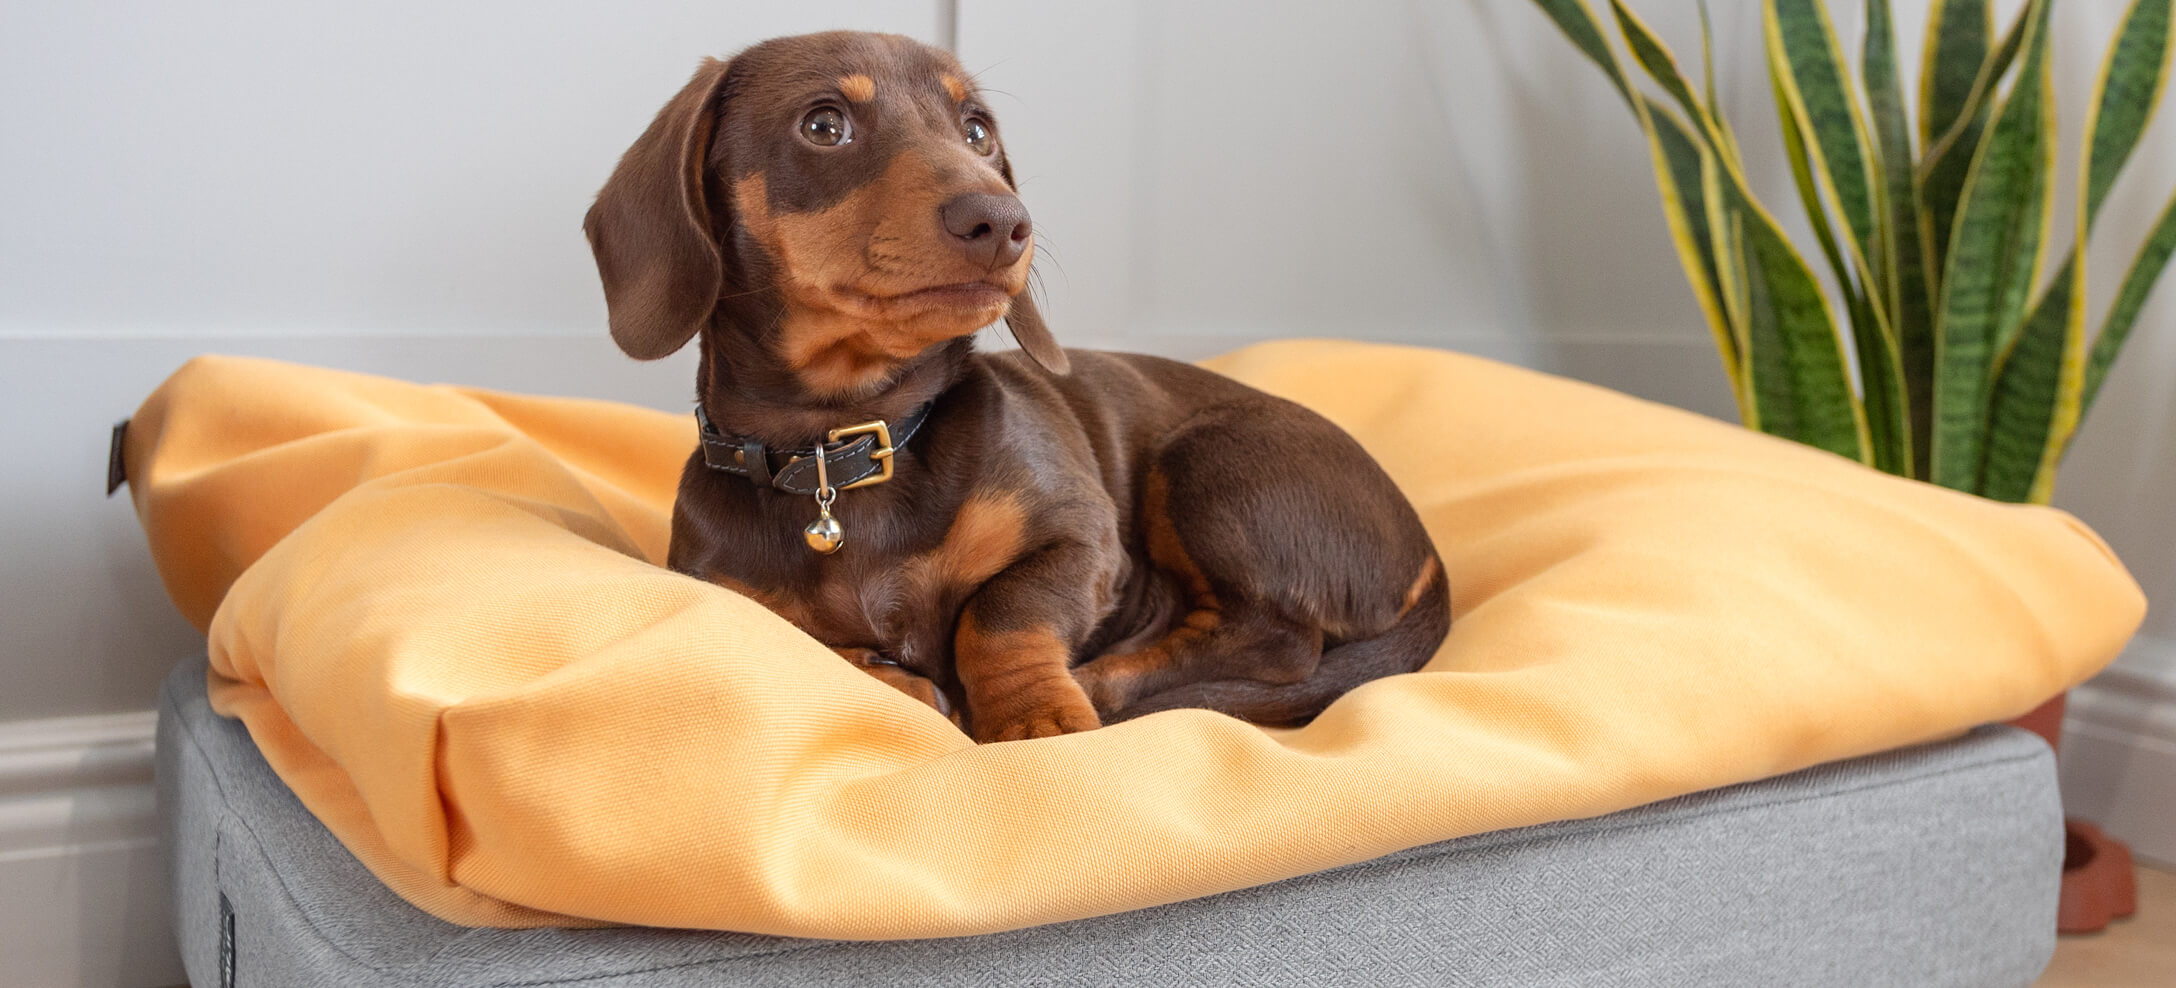 Pedigree dog breeds such as the Dachshund can cost thousands of dollars